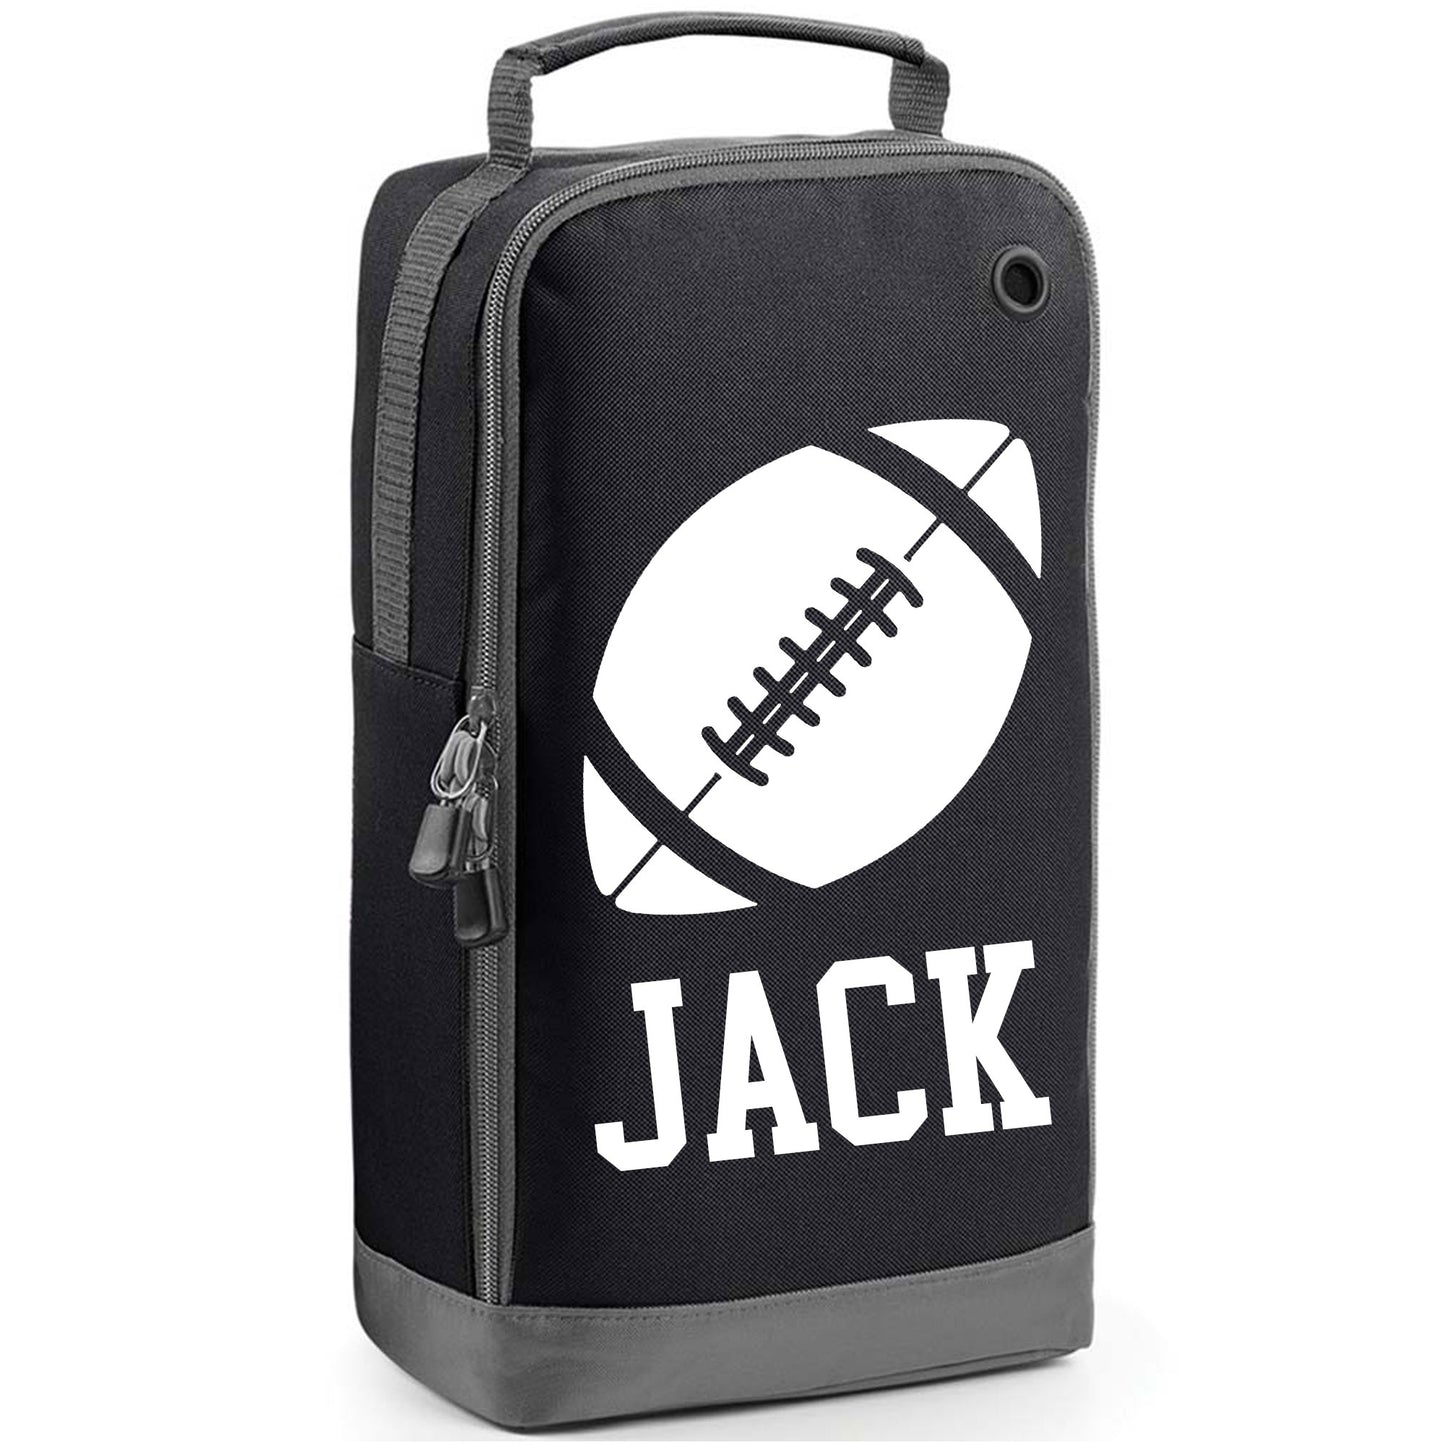 Personalised Rugby/ American Football Boot Bag with Design & Name  - Always Looking Good - Black  